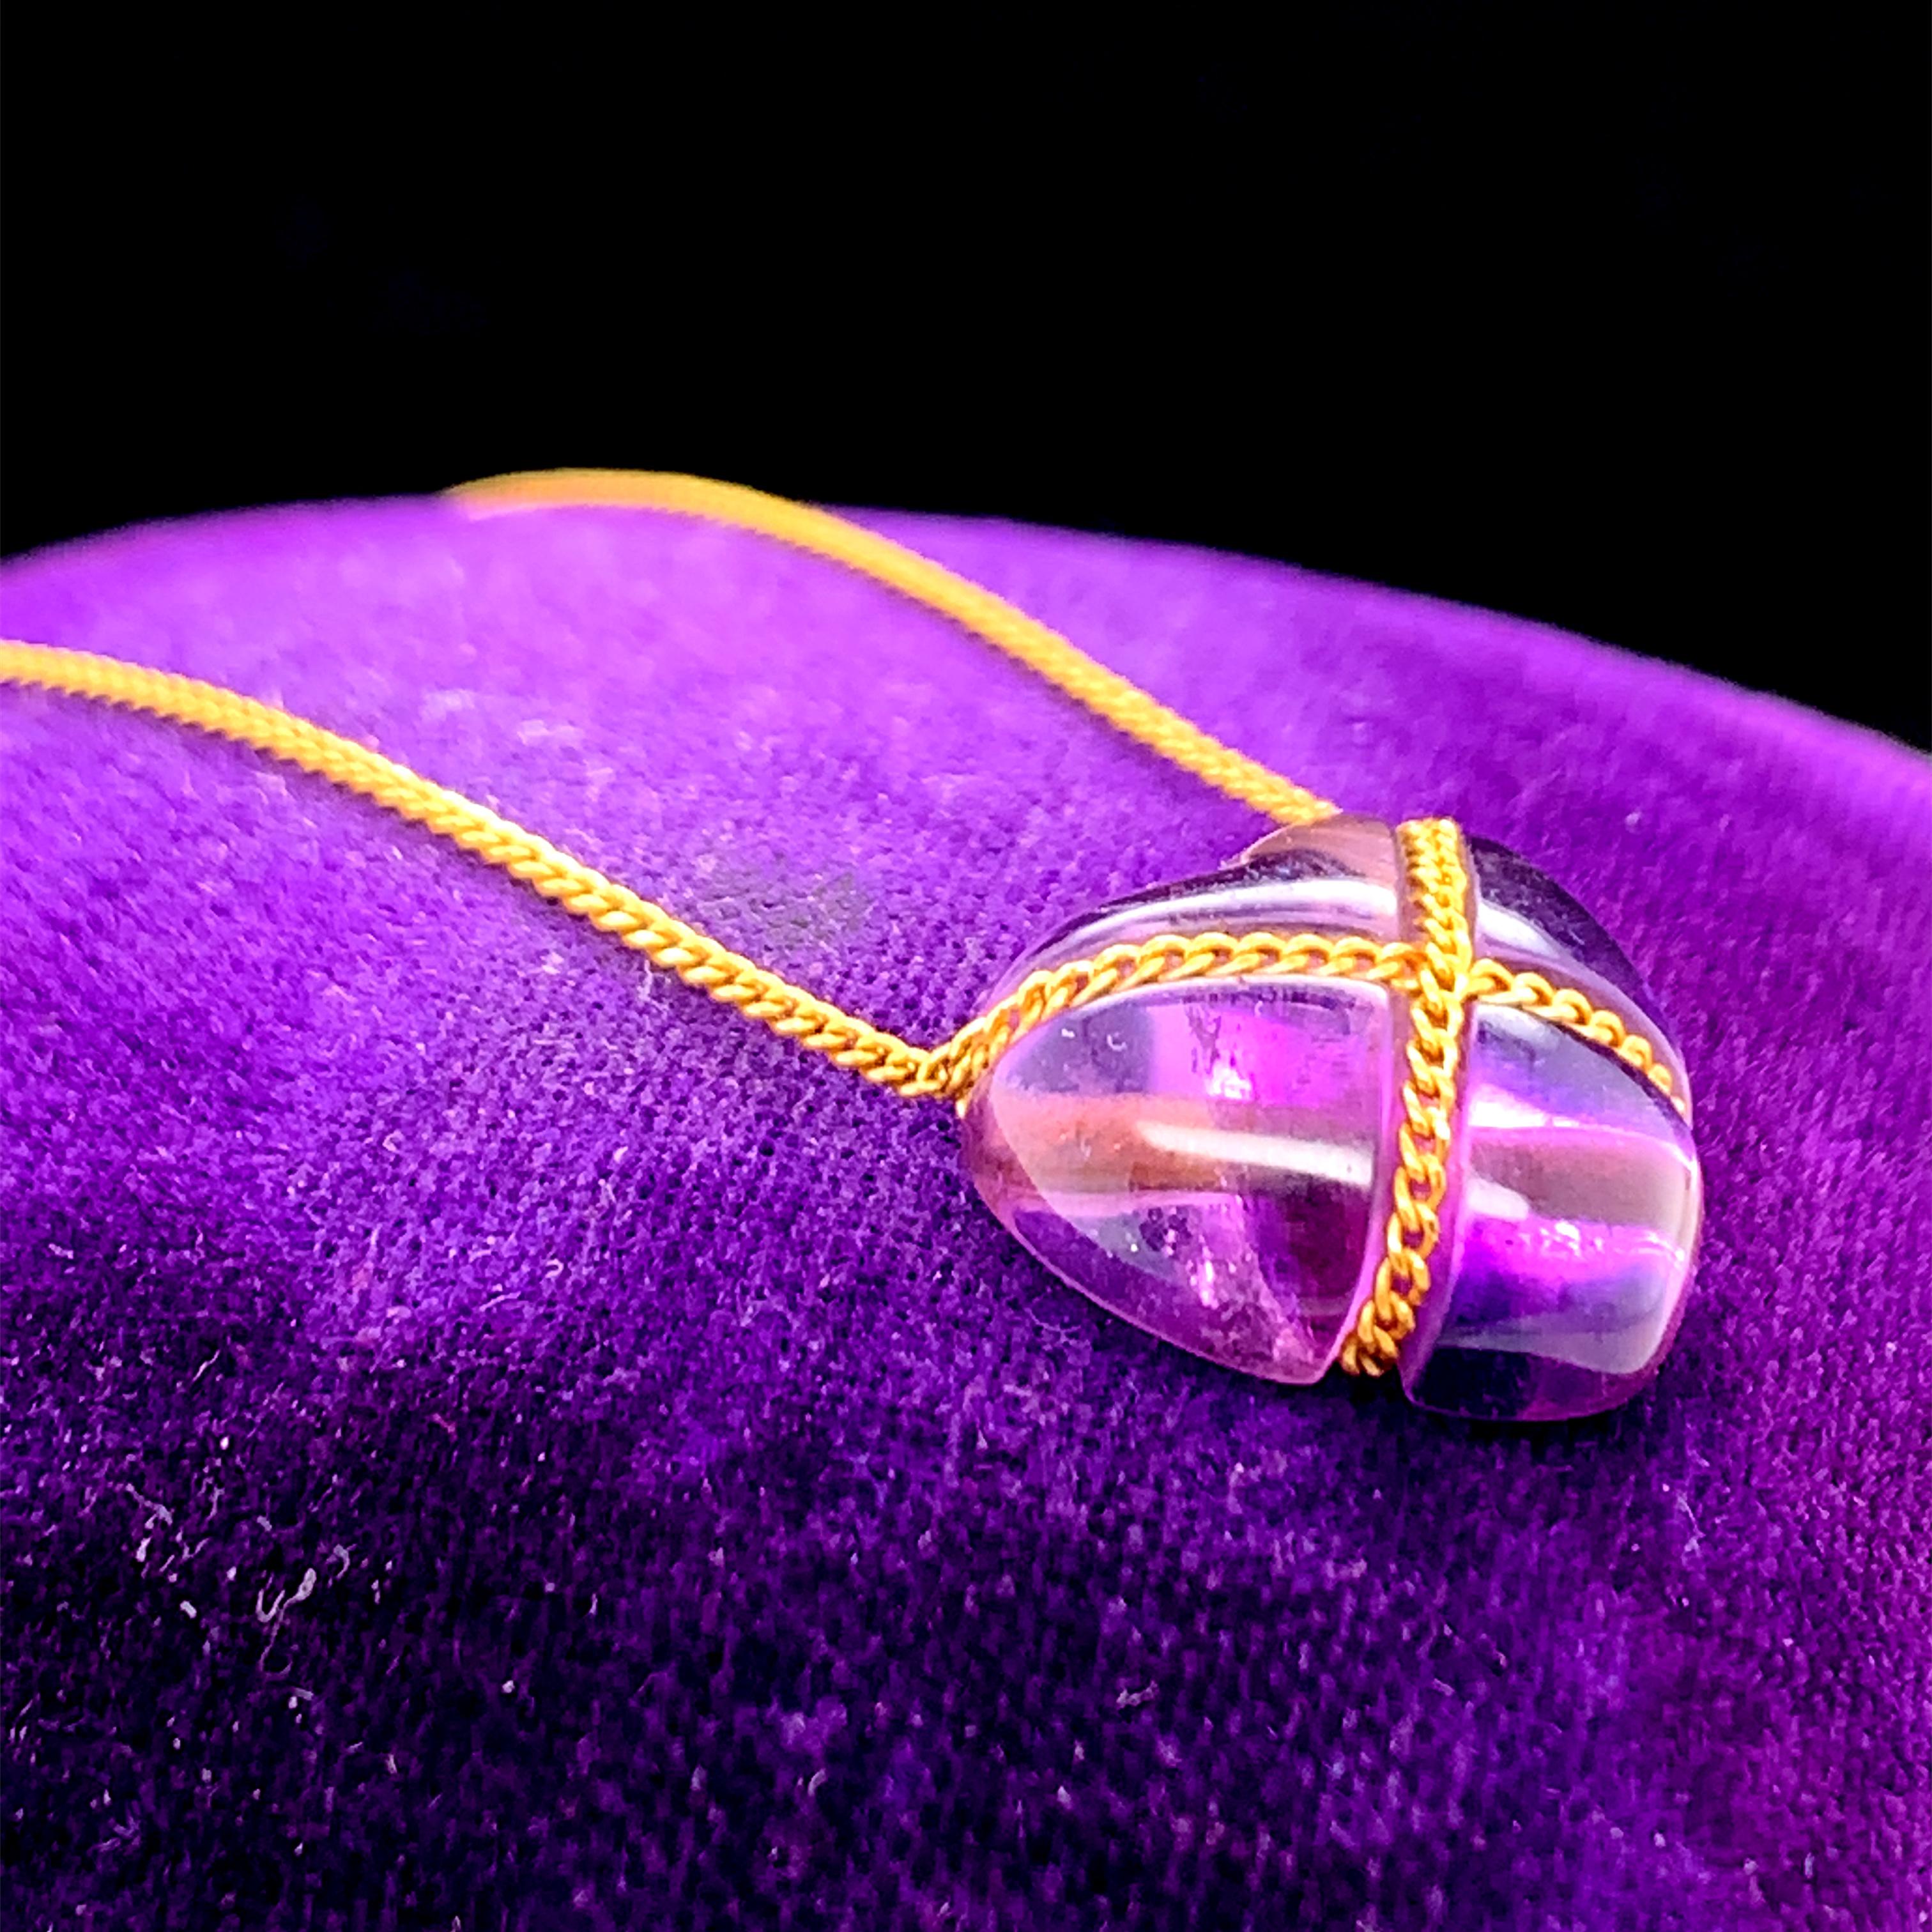 Year: 1990s

Item Details: 
Metal Type: 18K Yellow Gold [Hallmarked, and Tested]
Weight:  3.2 grams

Amethyst Details:
Weight: 4.00 carat (Approx)
Cut: Heart Shape
Color: Purple

Pendant Measurement: 12.8mm x 14mm
Skin to top of stone: 6.2mm
Chain